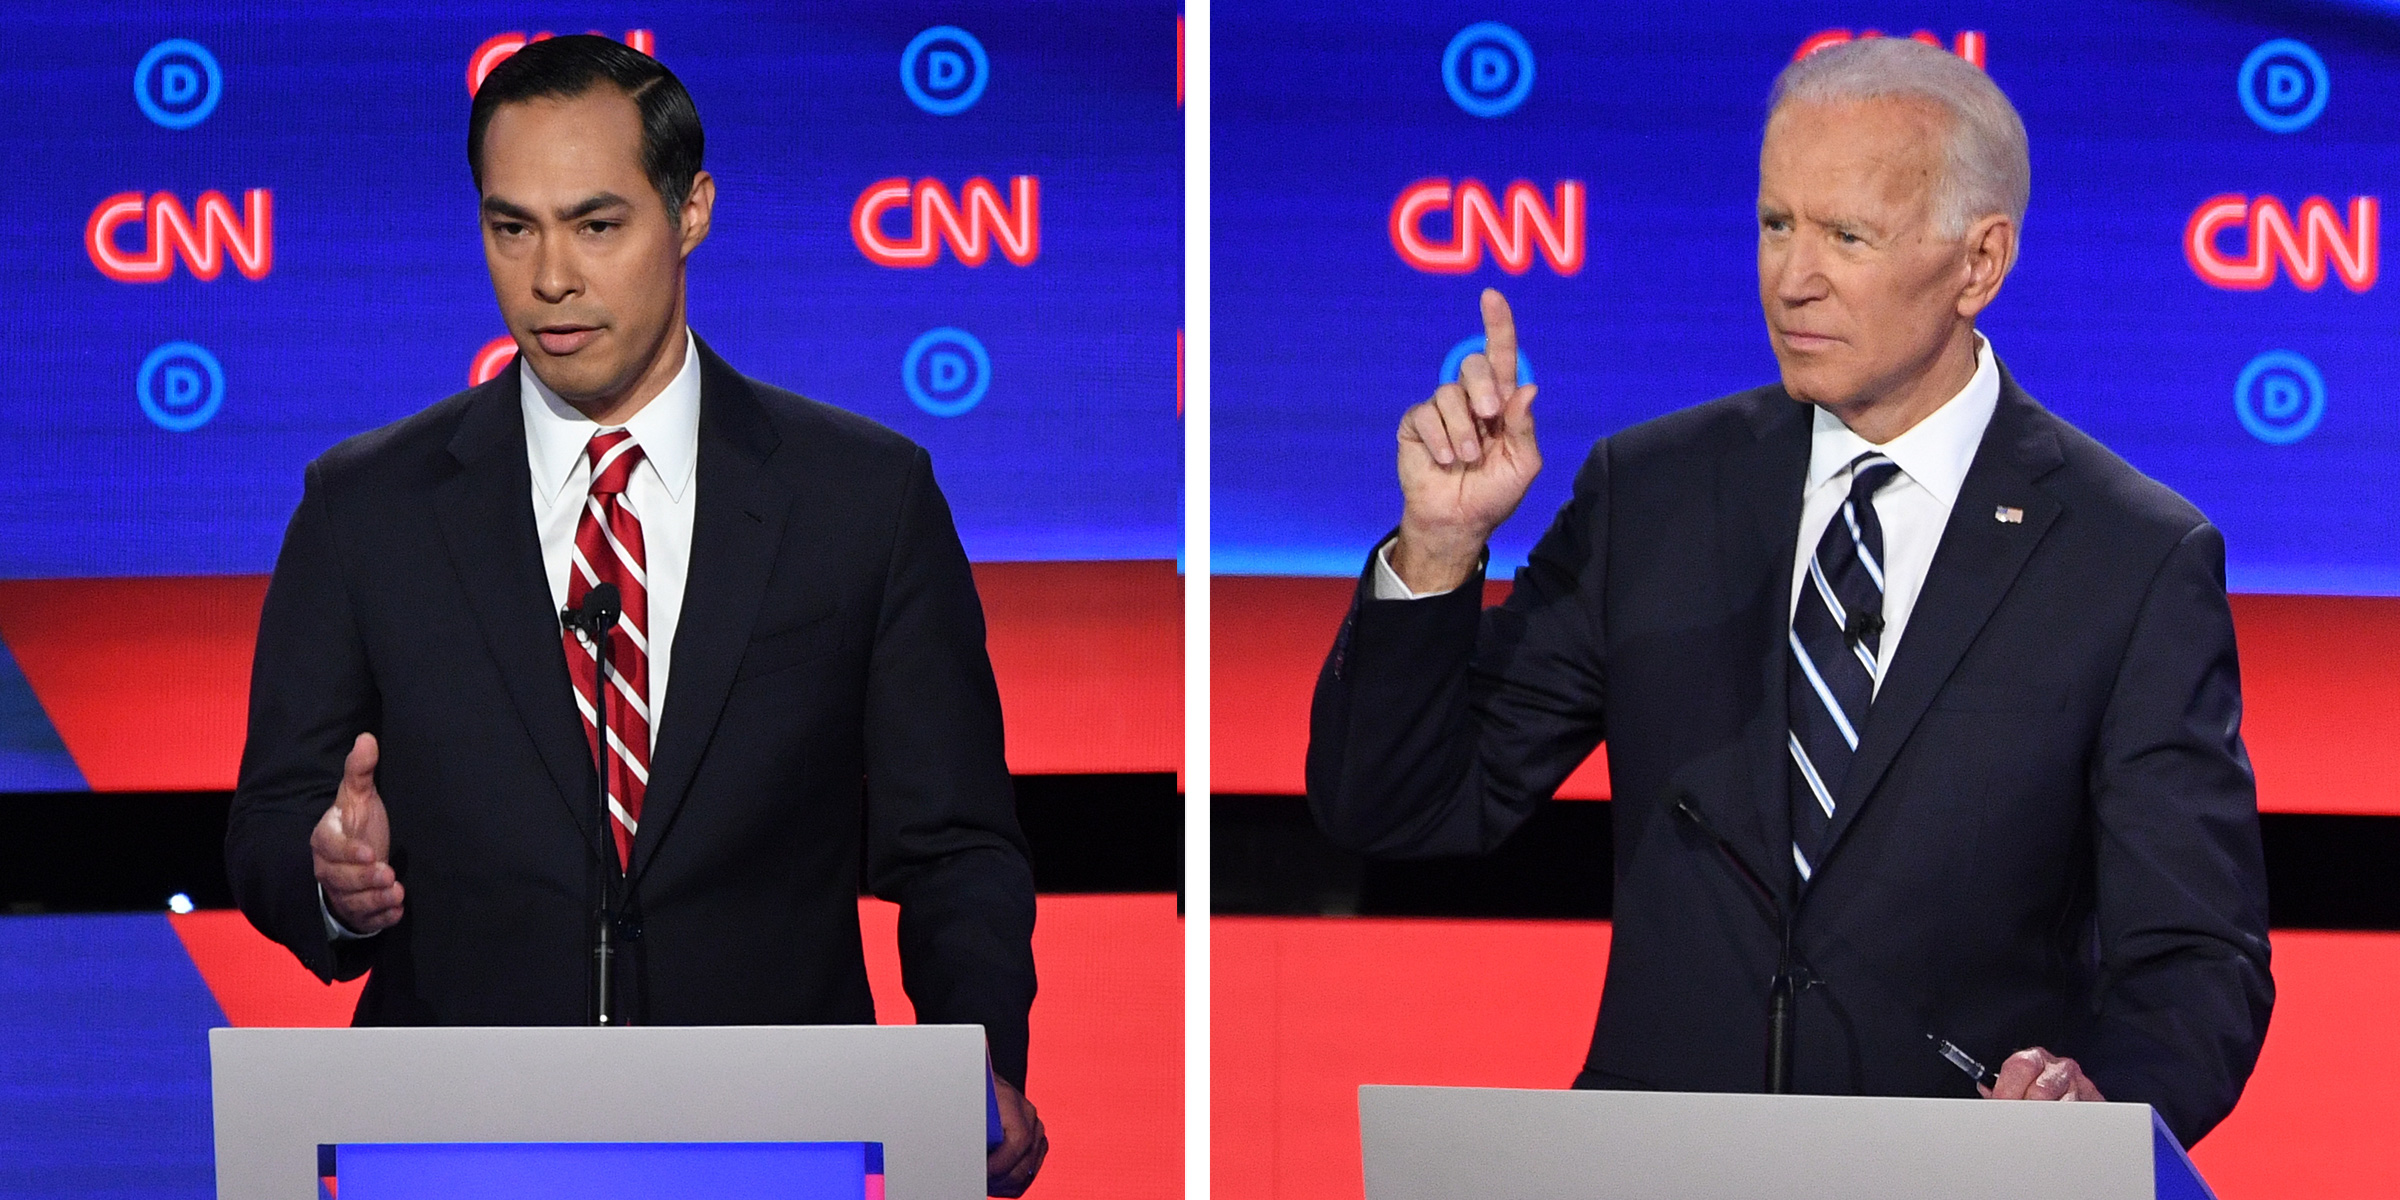 Democratic presidential hopefuls (L-R) Former US Secretary of Housing and Urban Development Julian Castro and Former Vice President Joe Biden during the second round of the second Democratic primary debate of the 2020 presidential campaign season hosted by CNN at the Fox Theatre in Detroit, Michigan on July 31, 2019. (Jim Watson—AFP/Getty Images)